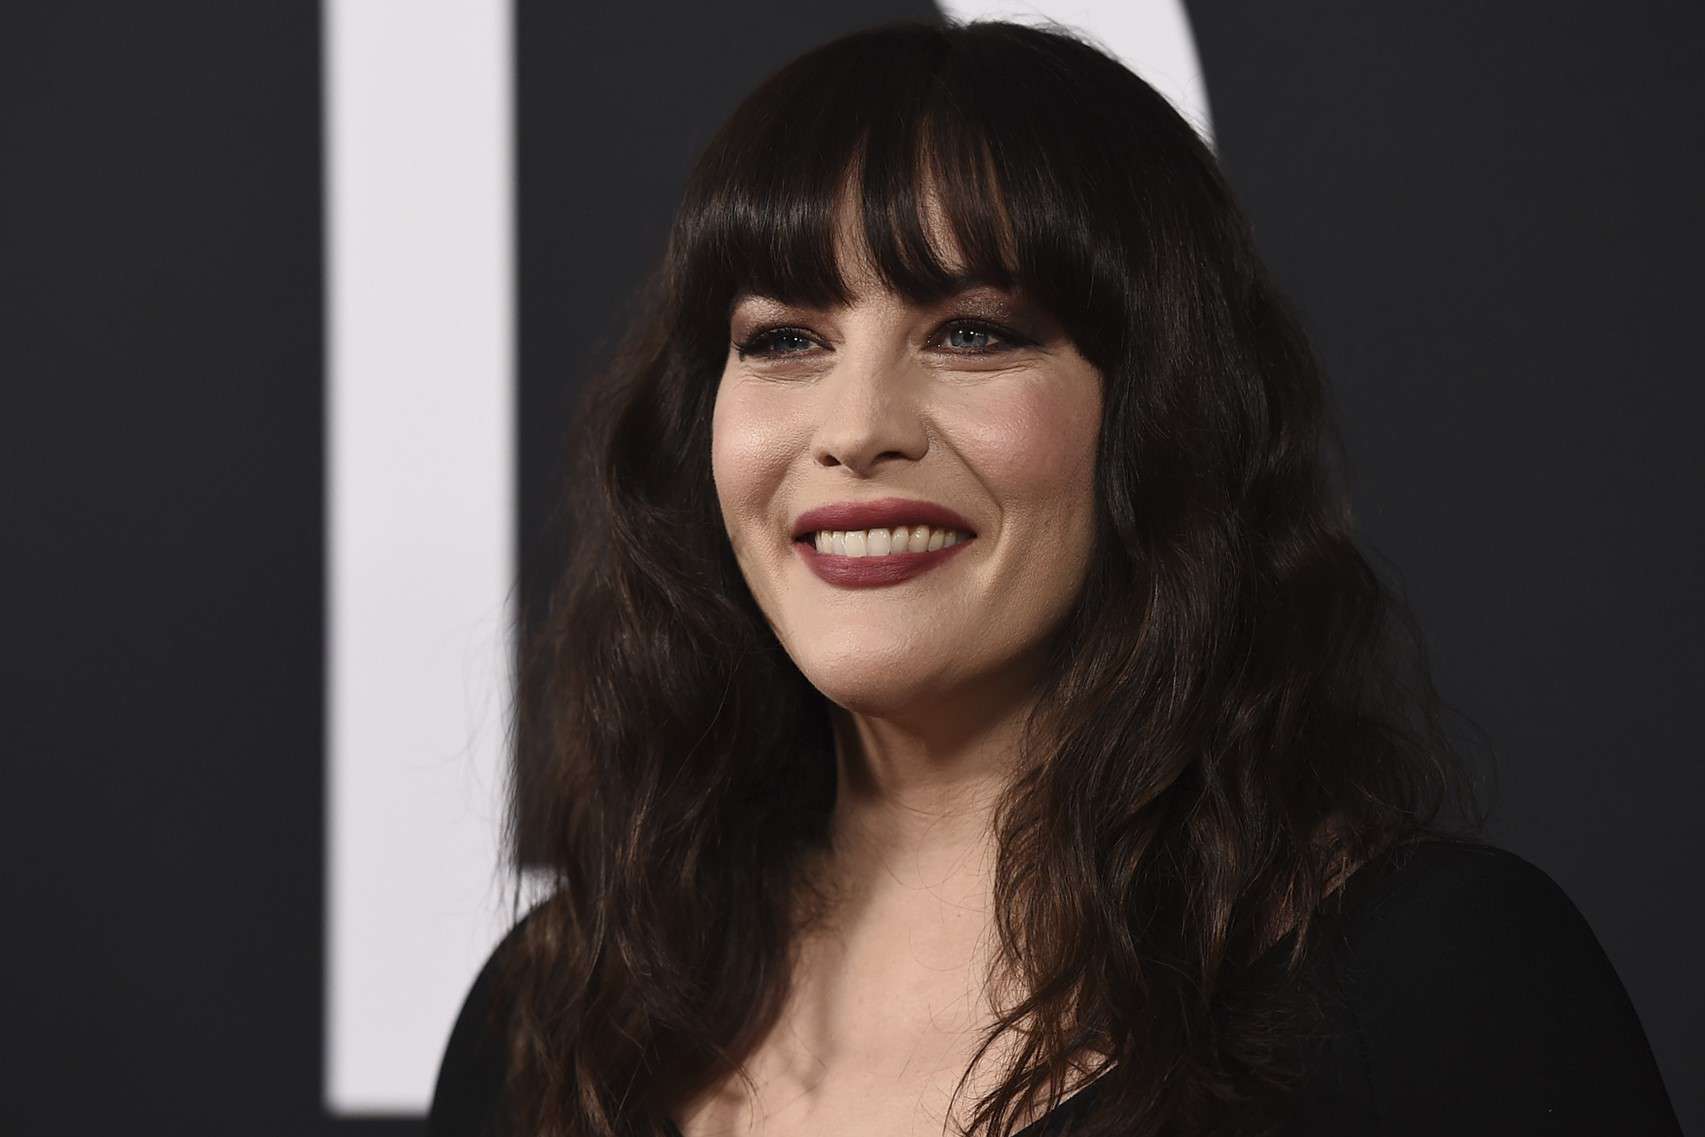 Liv Tyler has invested in various properties over the years